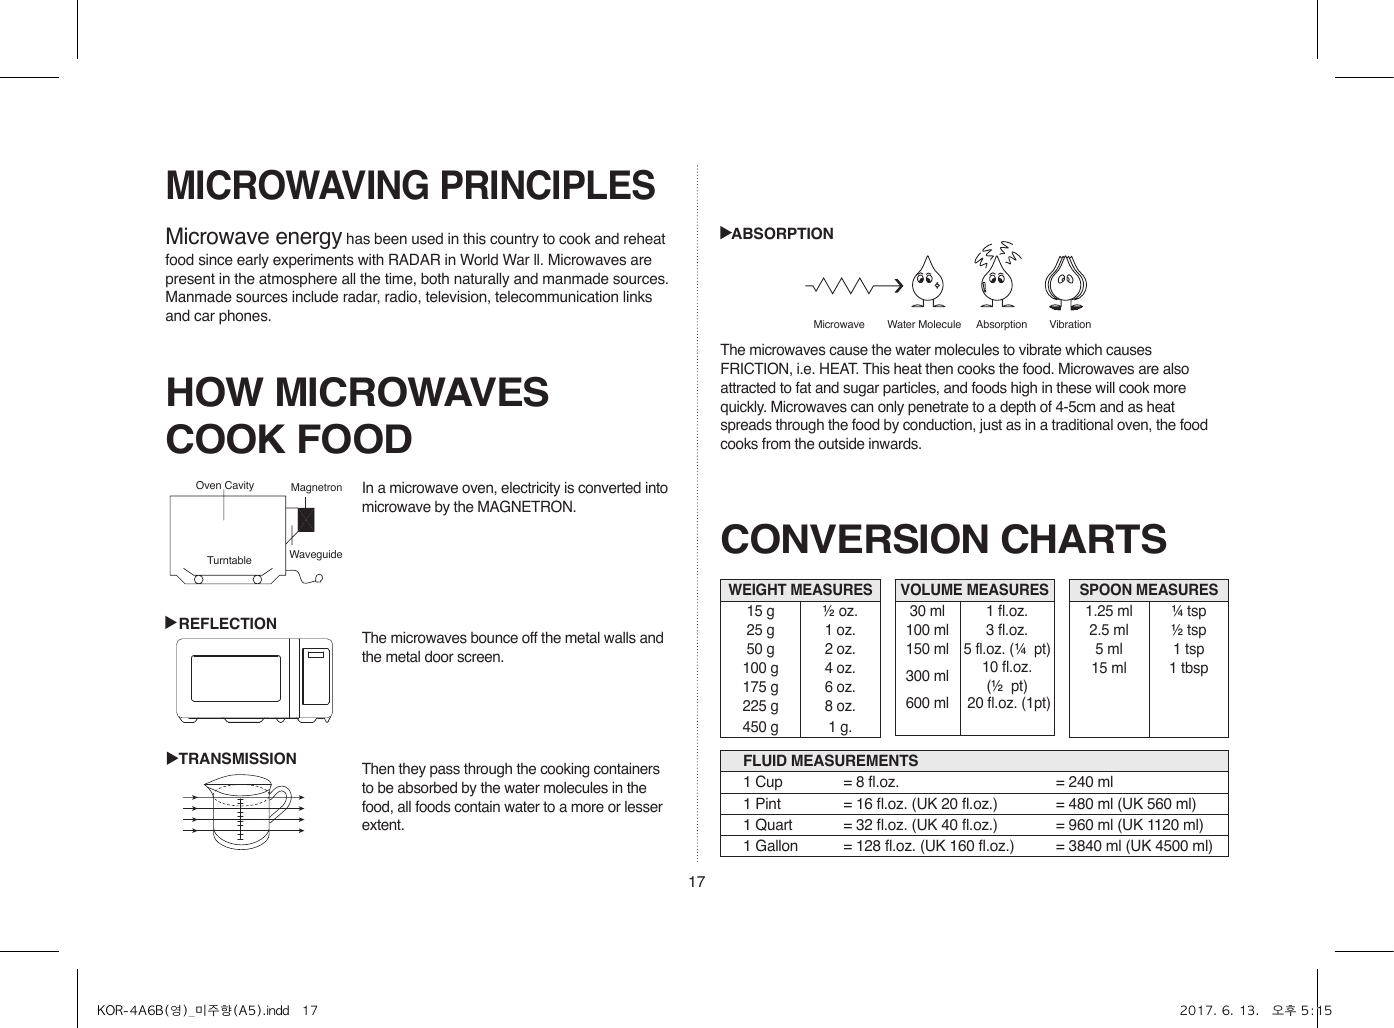 17MICROWAVING PRINCIPLESMicrowave energy has been used in this country to cook and reheat food since early experiments with RADAR in World War ll. Microwaves are present in the atmosphere all the time, both naturally and manmade sources. Manmade sources include radar, radio, television, telecommunication links and car phones.CONVERSION CHARTSHOW MICROWAVES COOK FOODThe microwaves cause the water molecules to vibrate which causes FRICTION, i.e. HEAT. This heat then cooks the food. Microwaves are also attracted to fat and sugar particles, and foods high in these will cook more quickly. Microwaves can only penetrate to a depth of 4-5cm and as heat spreads through the food by conduction, just as in a traditional oven, the food cooks from the outside inwards.In a microwave oven, electricity is converted into microwave by the MAGNETRON.The microwaves bounce off the metal walls and the metal door screen.Then they pass through the cooking containers to be absorbed by the water molecules in the food, all foods contain water to a more or lesser extent.Oven Cavity MagnetronWaveguideTurntableREFLECTIONTRANSMISSIONABSORPTIONMicrowave  Water Molecule  Absorption  VibrationWEIGHT MEASURES15 g ½ oz.25 g 1 oz.50 g 2 oz.100 g 4 oz.175 g 6 oz.225 g 8 oz.450 g 1 g.FLUID MEASUREMENTS1 Cup = 8 fl.oz. = 240 ml1 Pint = 16 fl.oz. (UK 20 fl.oz.) = 480 ml (UK 560 ml)1 Quart = 32 fl.oz. (UK 40 fl.oz.) = 960 ml (UK 1120 ml)1 Gallon = 128 fl.oz. (UK 160 fl.oz.) = 3840 ml (UK 4500 ml)VOLUME MEASURES30 ml 1 fl.oz.100 ml 3 fl.oz.150 ml 5 fl.oz. (¼  pt)300 ml 10 fl.oz.(½  pt)600 ml  20 fl.oz. (1pt)SPOON MEASURES1.25 ml ¼ tsp2.5 ml ½ tsp5 ml 1 tsp15 ml 1 tbspKOR-4A6B(영)_미주향(A5).indd   17 2017. 6. 13.   오후 5:15